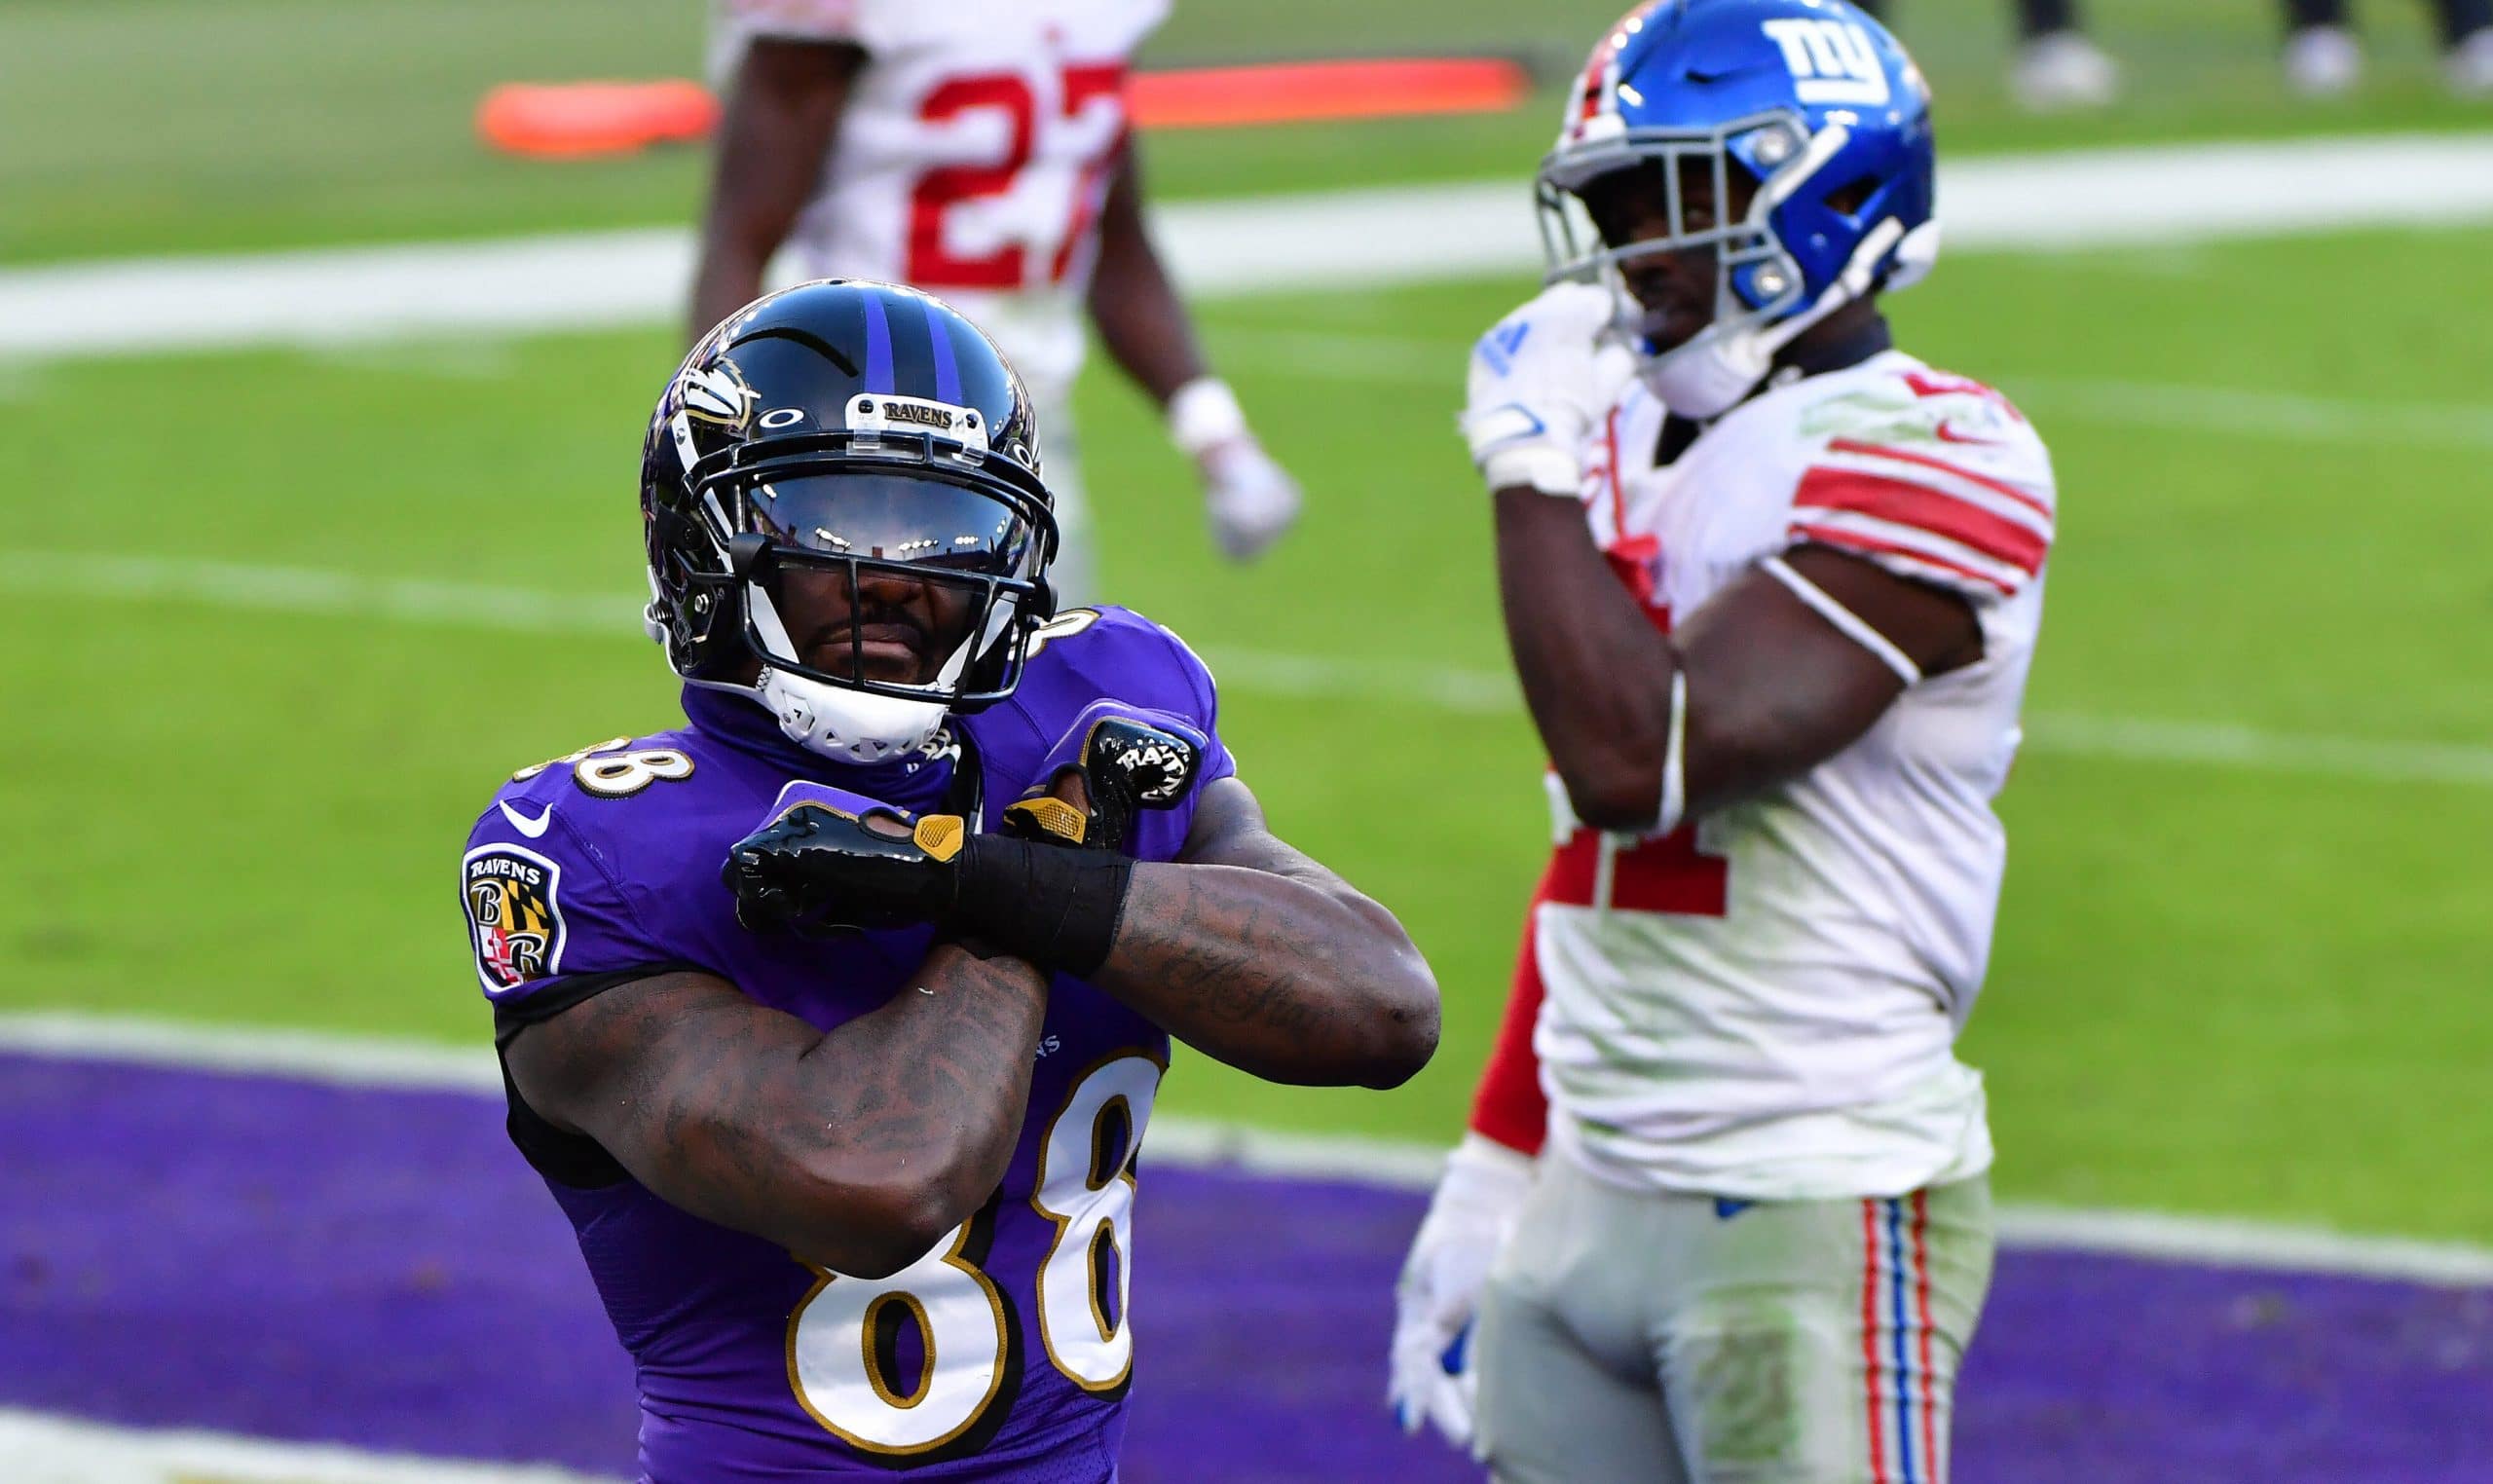 Baltimore Ravens wide receiver Dez Bryant (88) reacts after an 8-yard touchdown pass against the New York Giants during